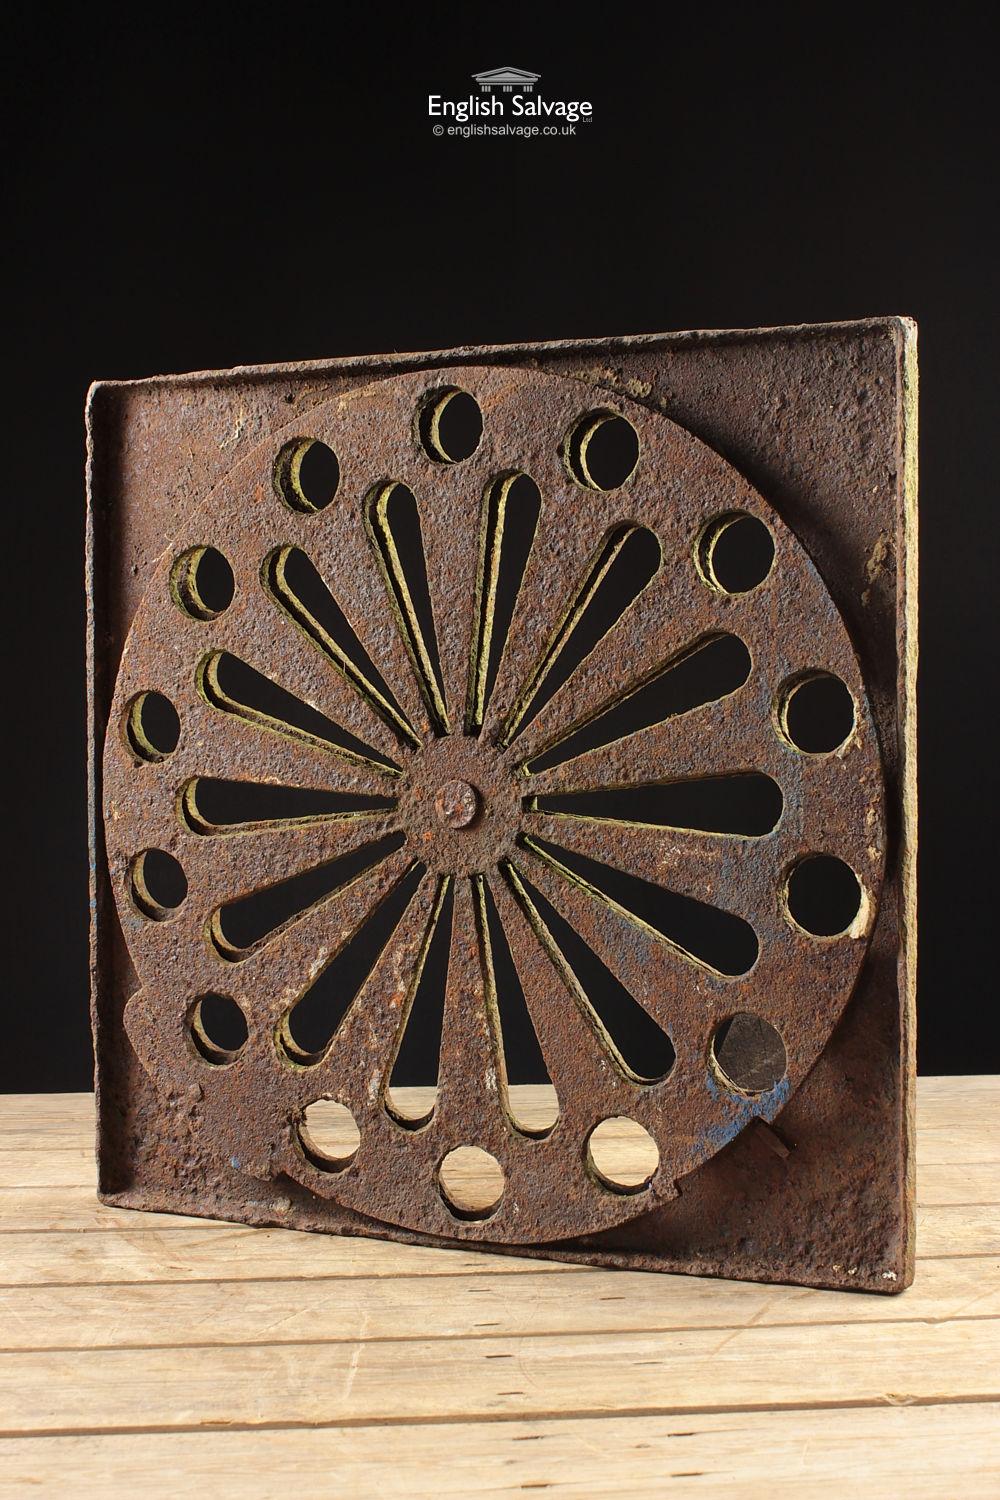 Reclaimed Square Cast Iron Decorative Plates, 20th Century In Good Condition For Sale In London, GB